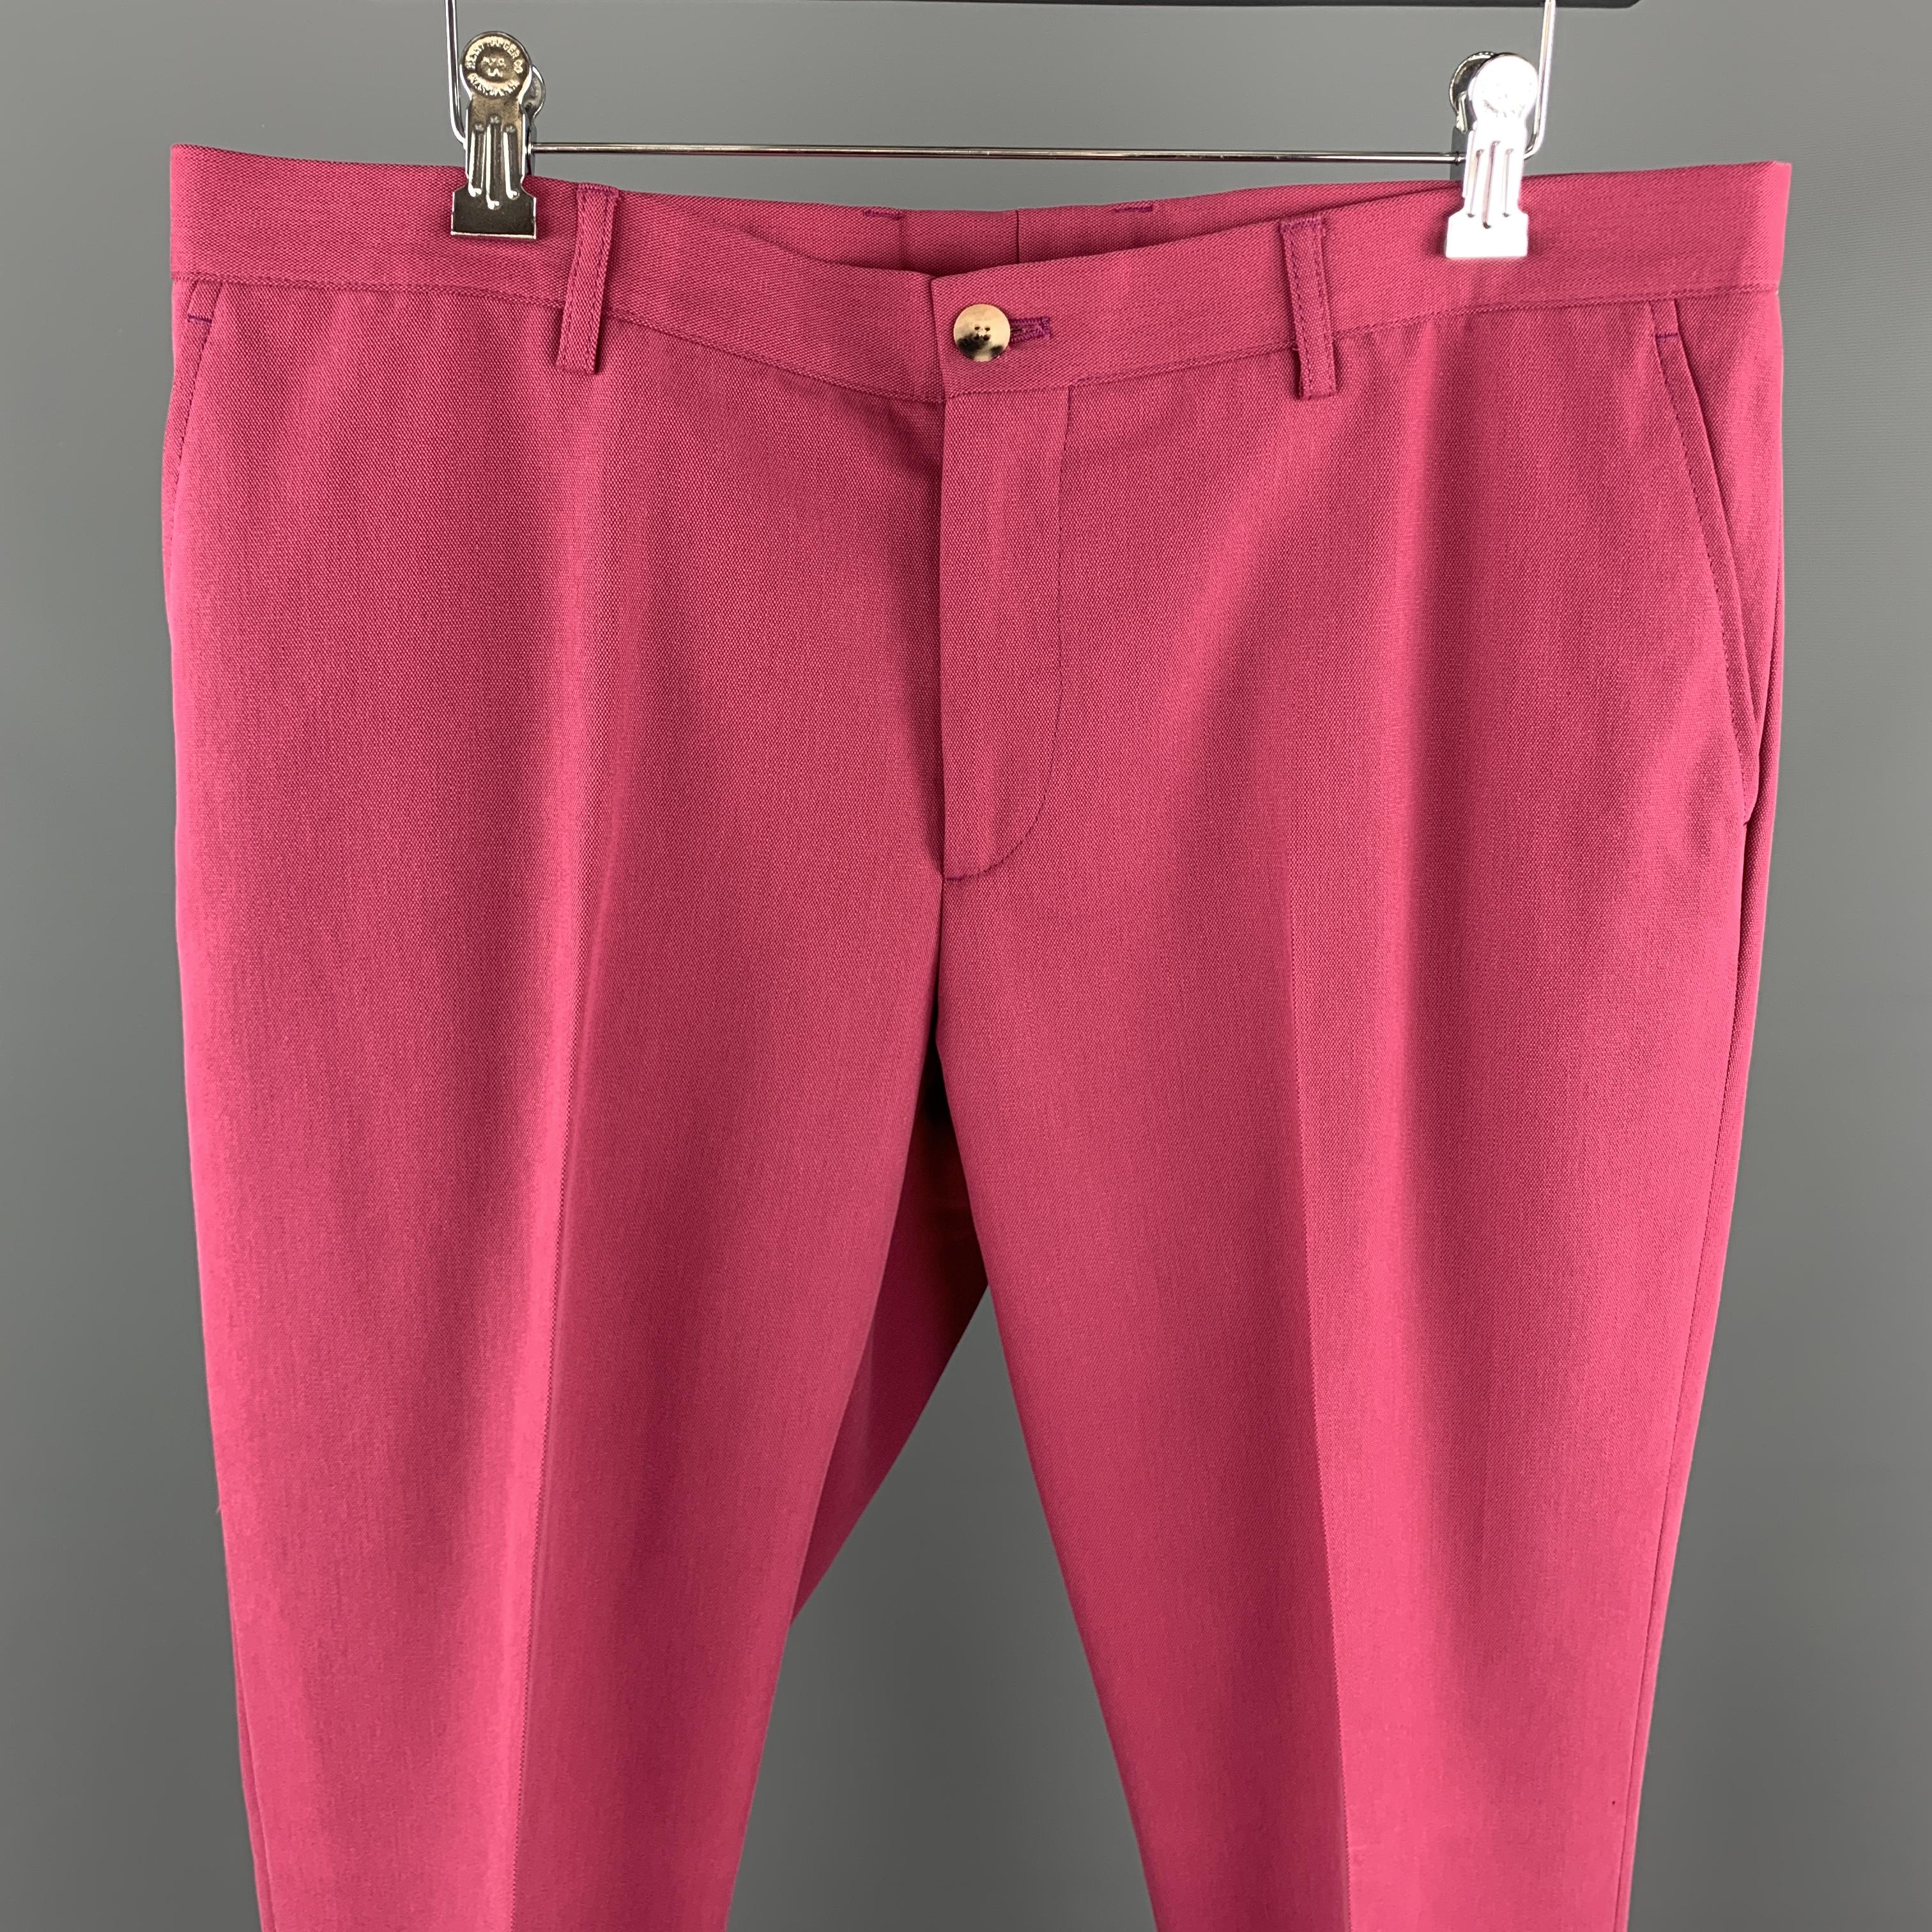 ETRO casual pants come in a muted raspberry pink cotton blend pique material with a flat front, and zip fly. Made in Italy.

Excellent Pre-Owned Condition.
Marked: IT 54

Measurements:

Waist: 38 in.
Rise: 10 in.
Inseam: 32 in.